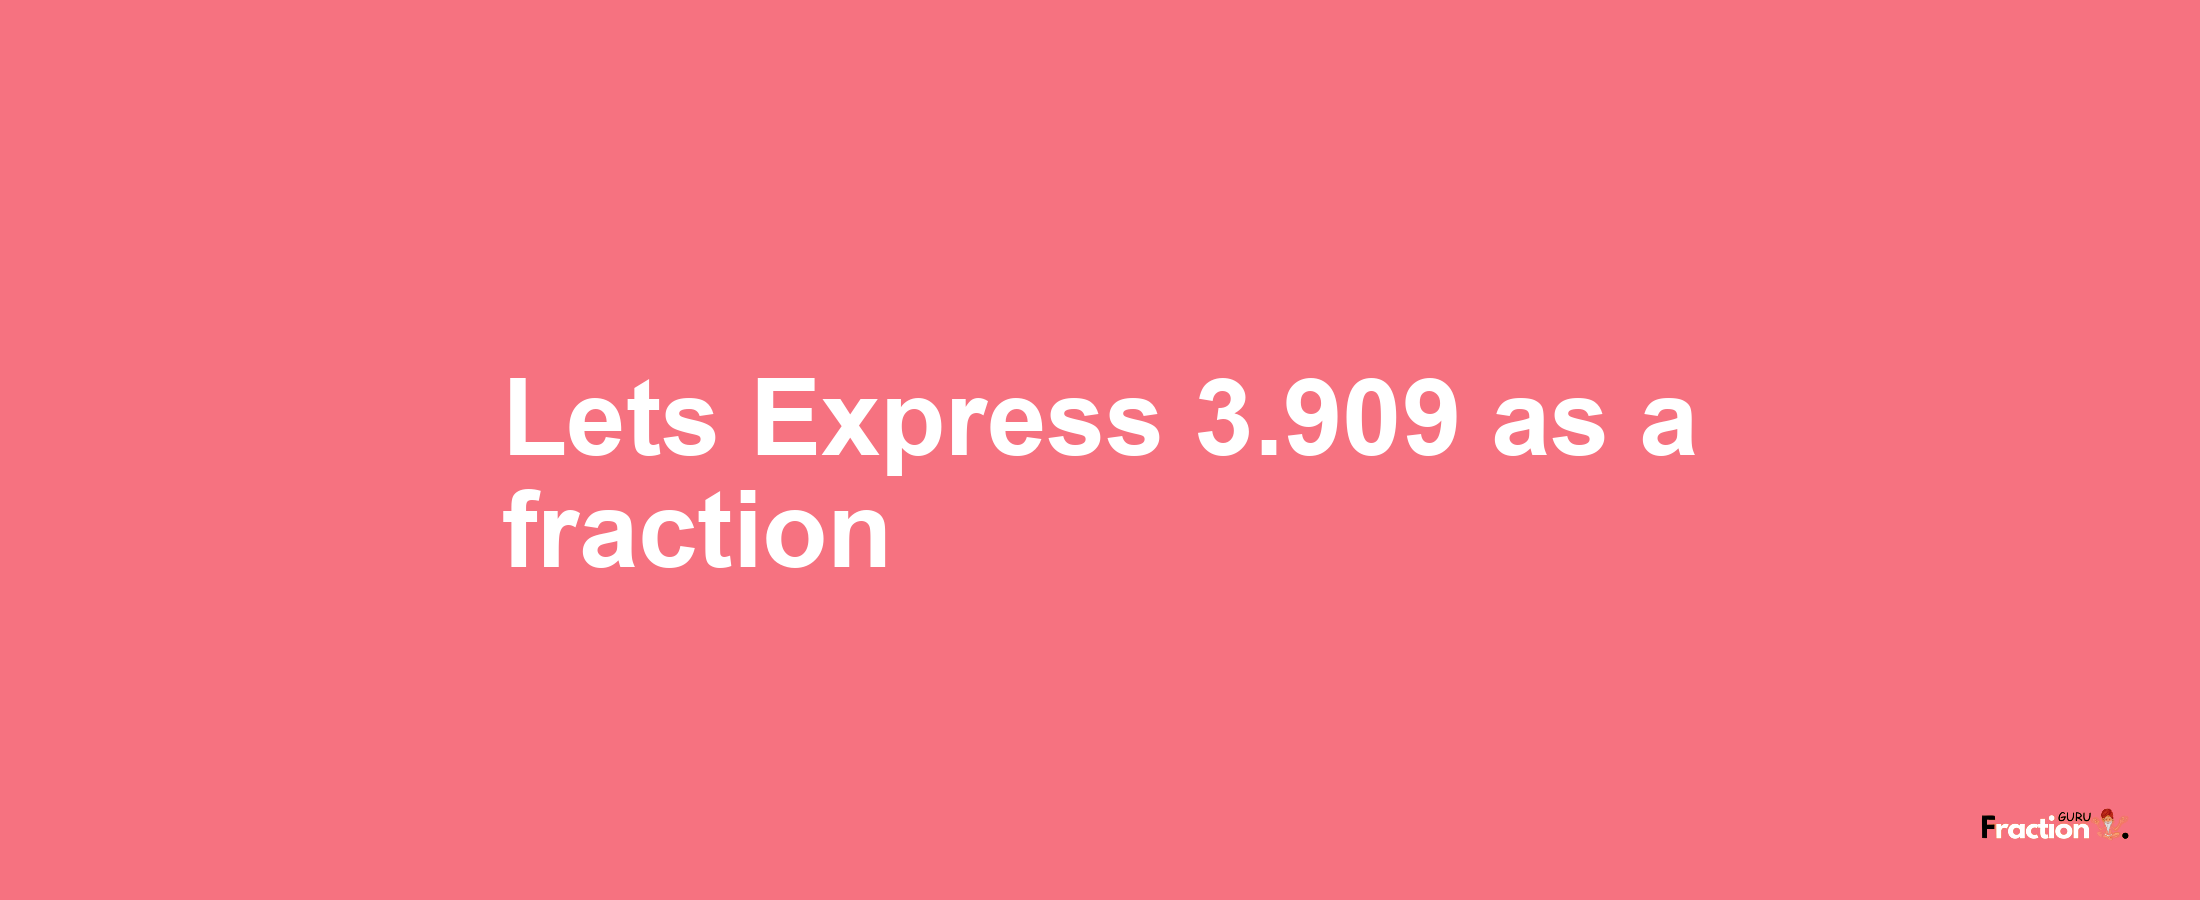 Lets Express 3.909 as afraction